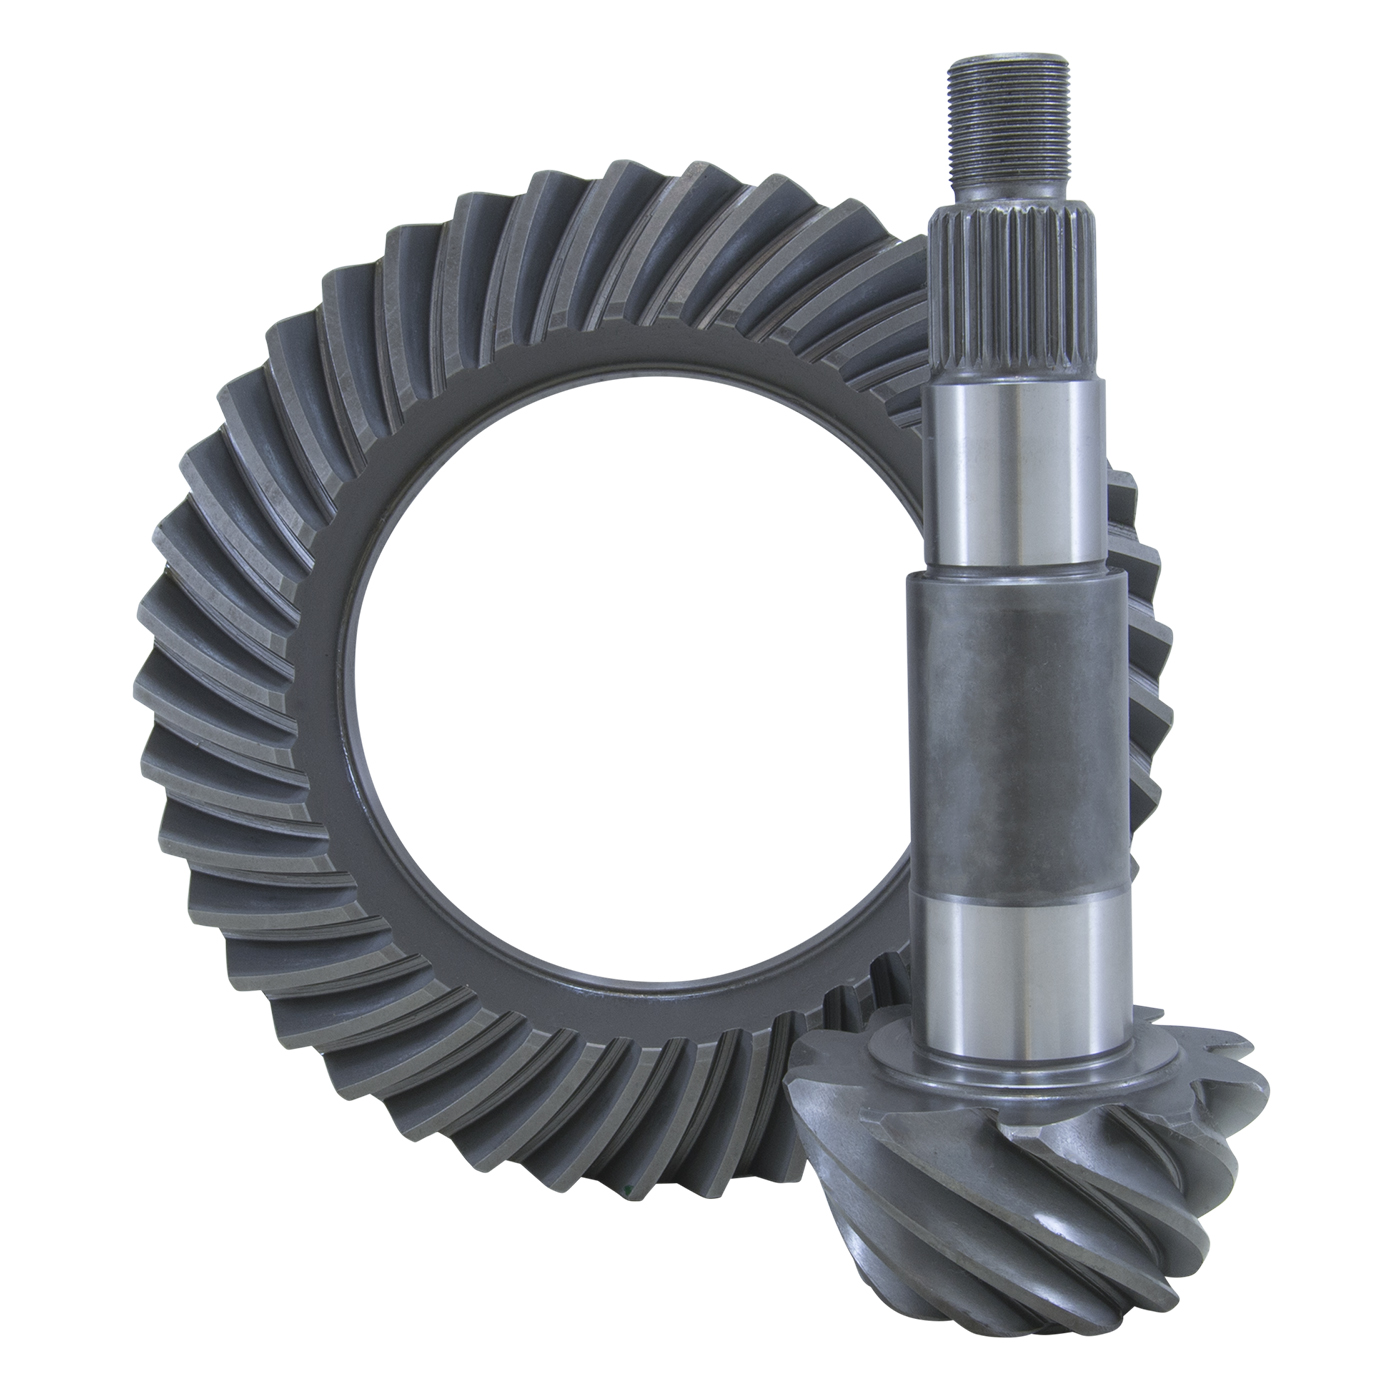 USA Standard Ring & Pinion gear set for Model 20 in a 4.11 ratio